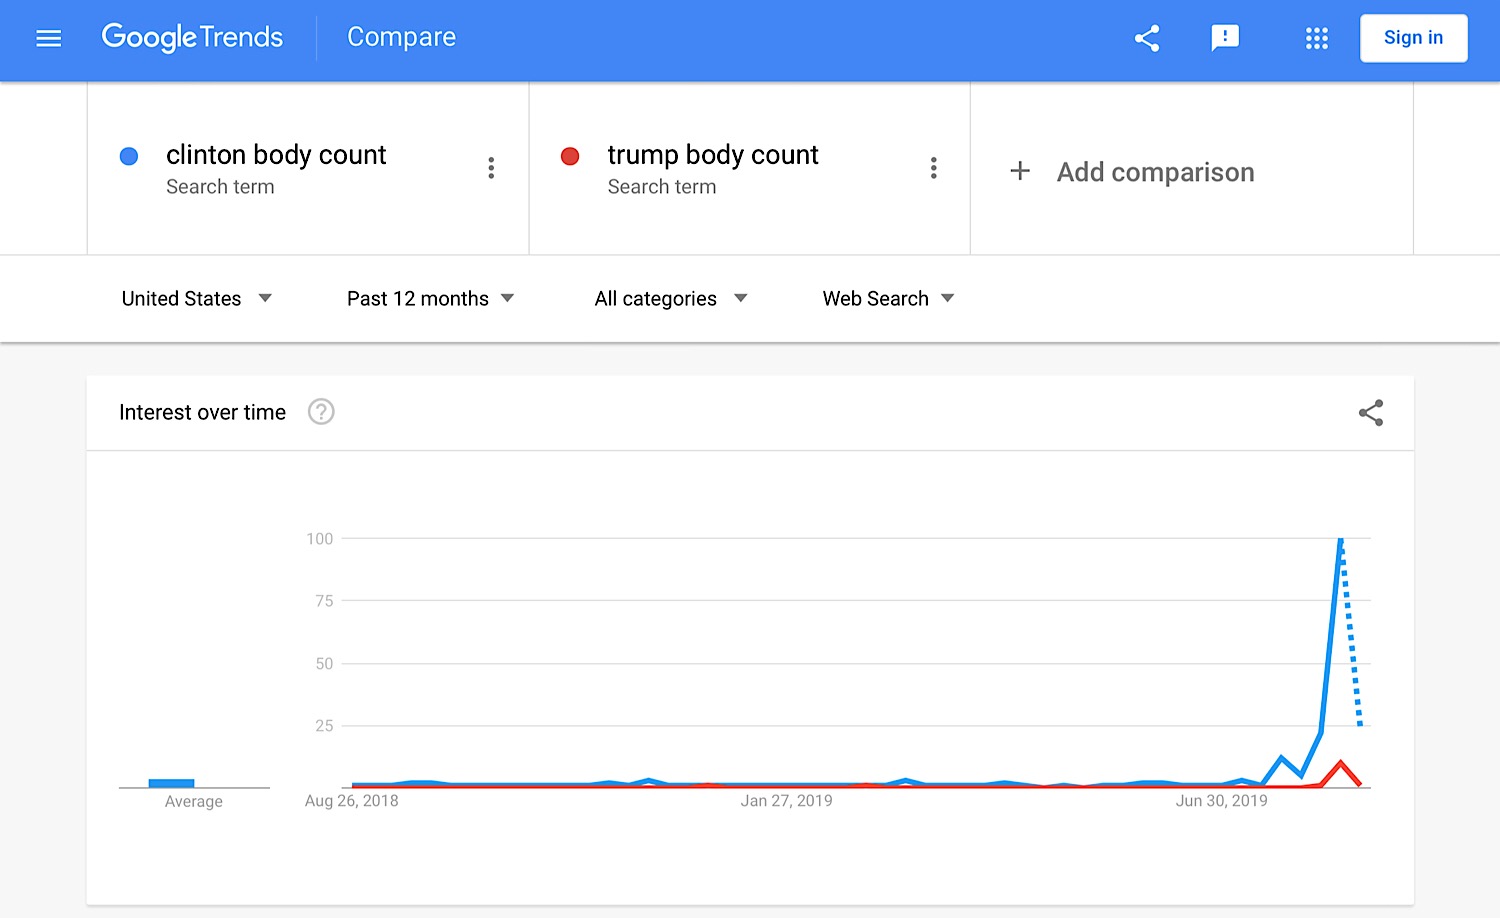 A comparison of searches for “Clinton body count” and “Trump body count” over the last 12 months.